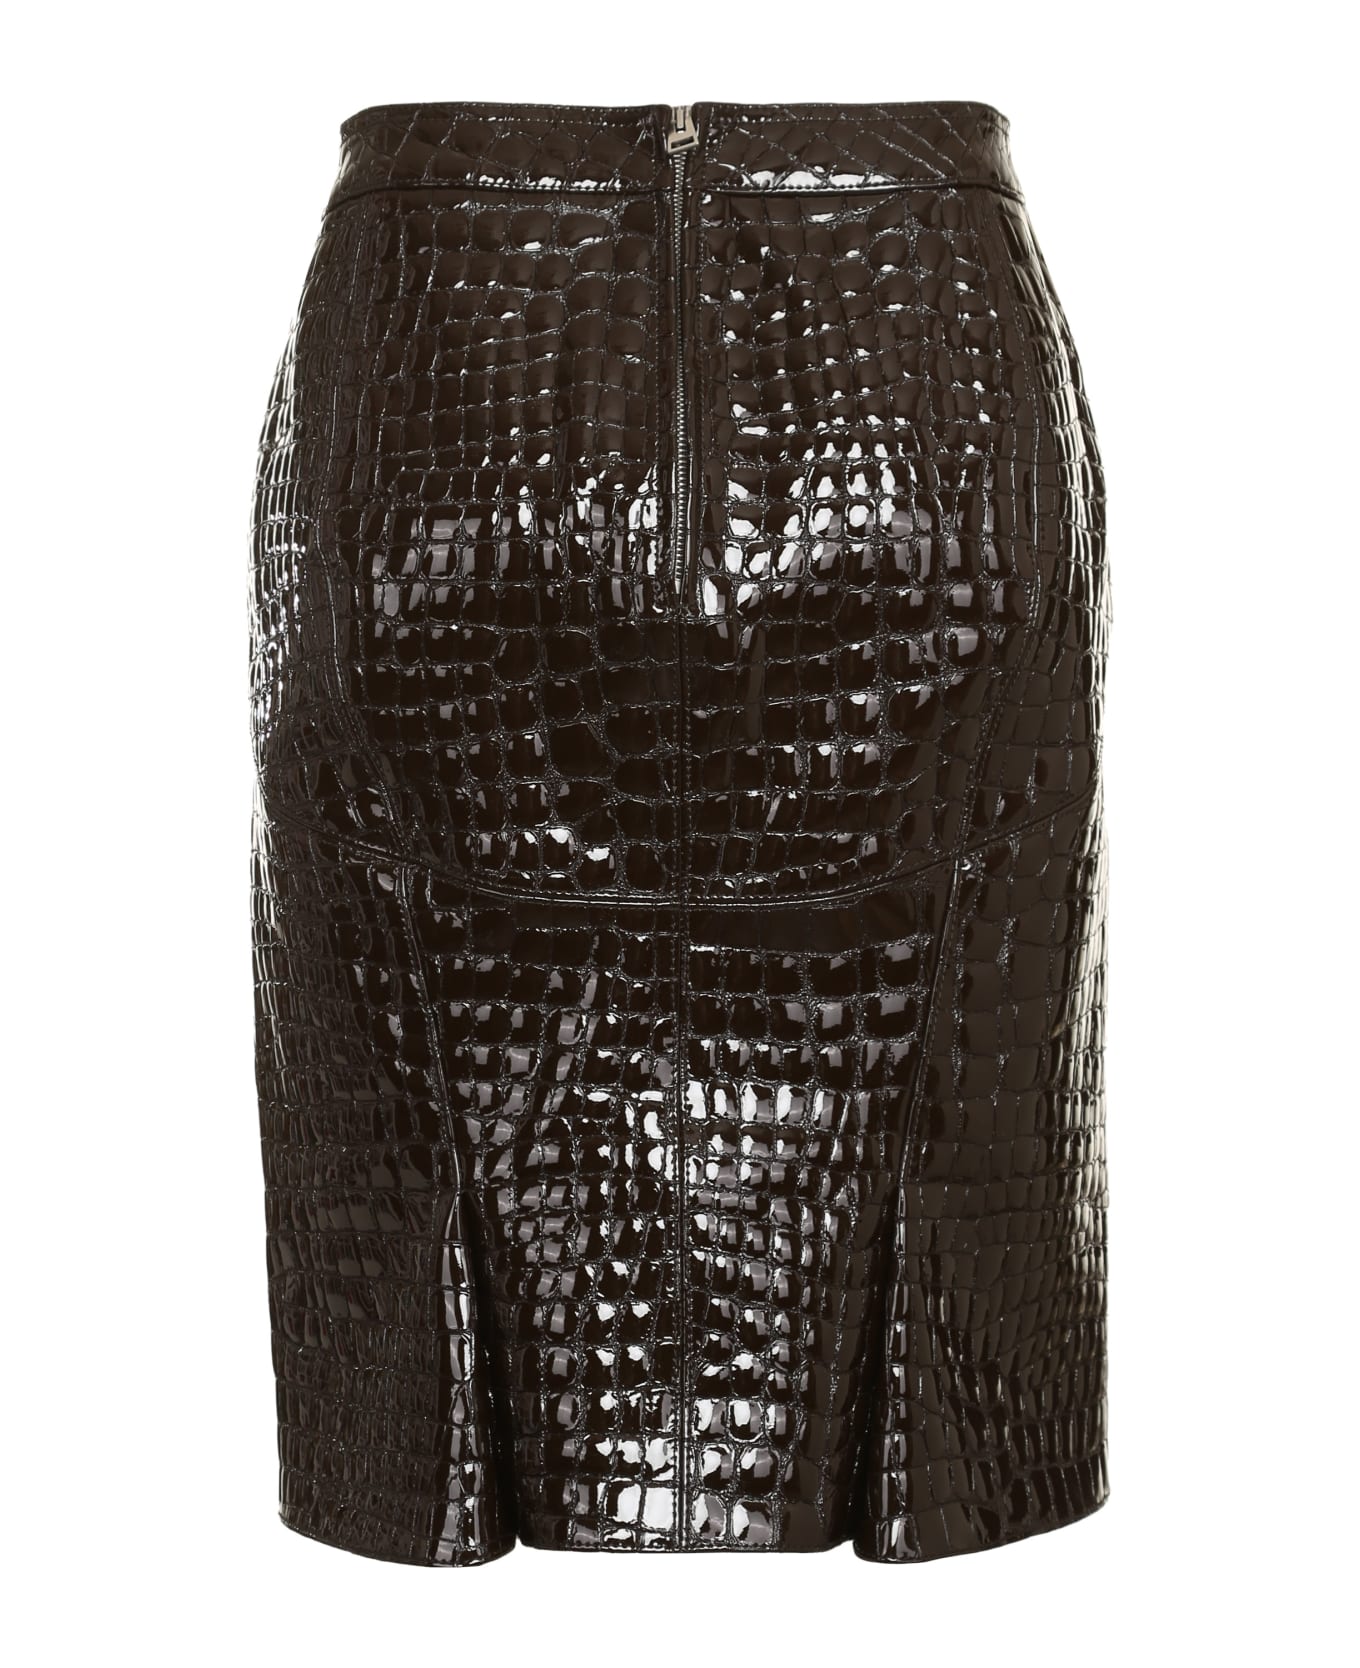 Tom Ford Leather Skirt - brown